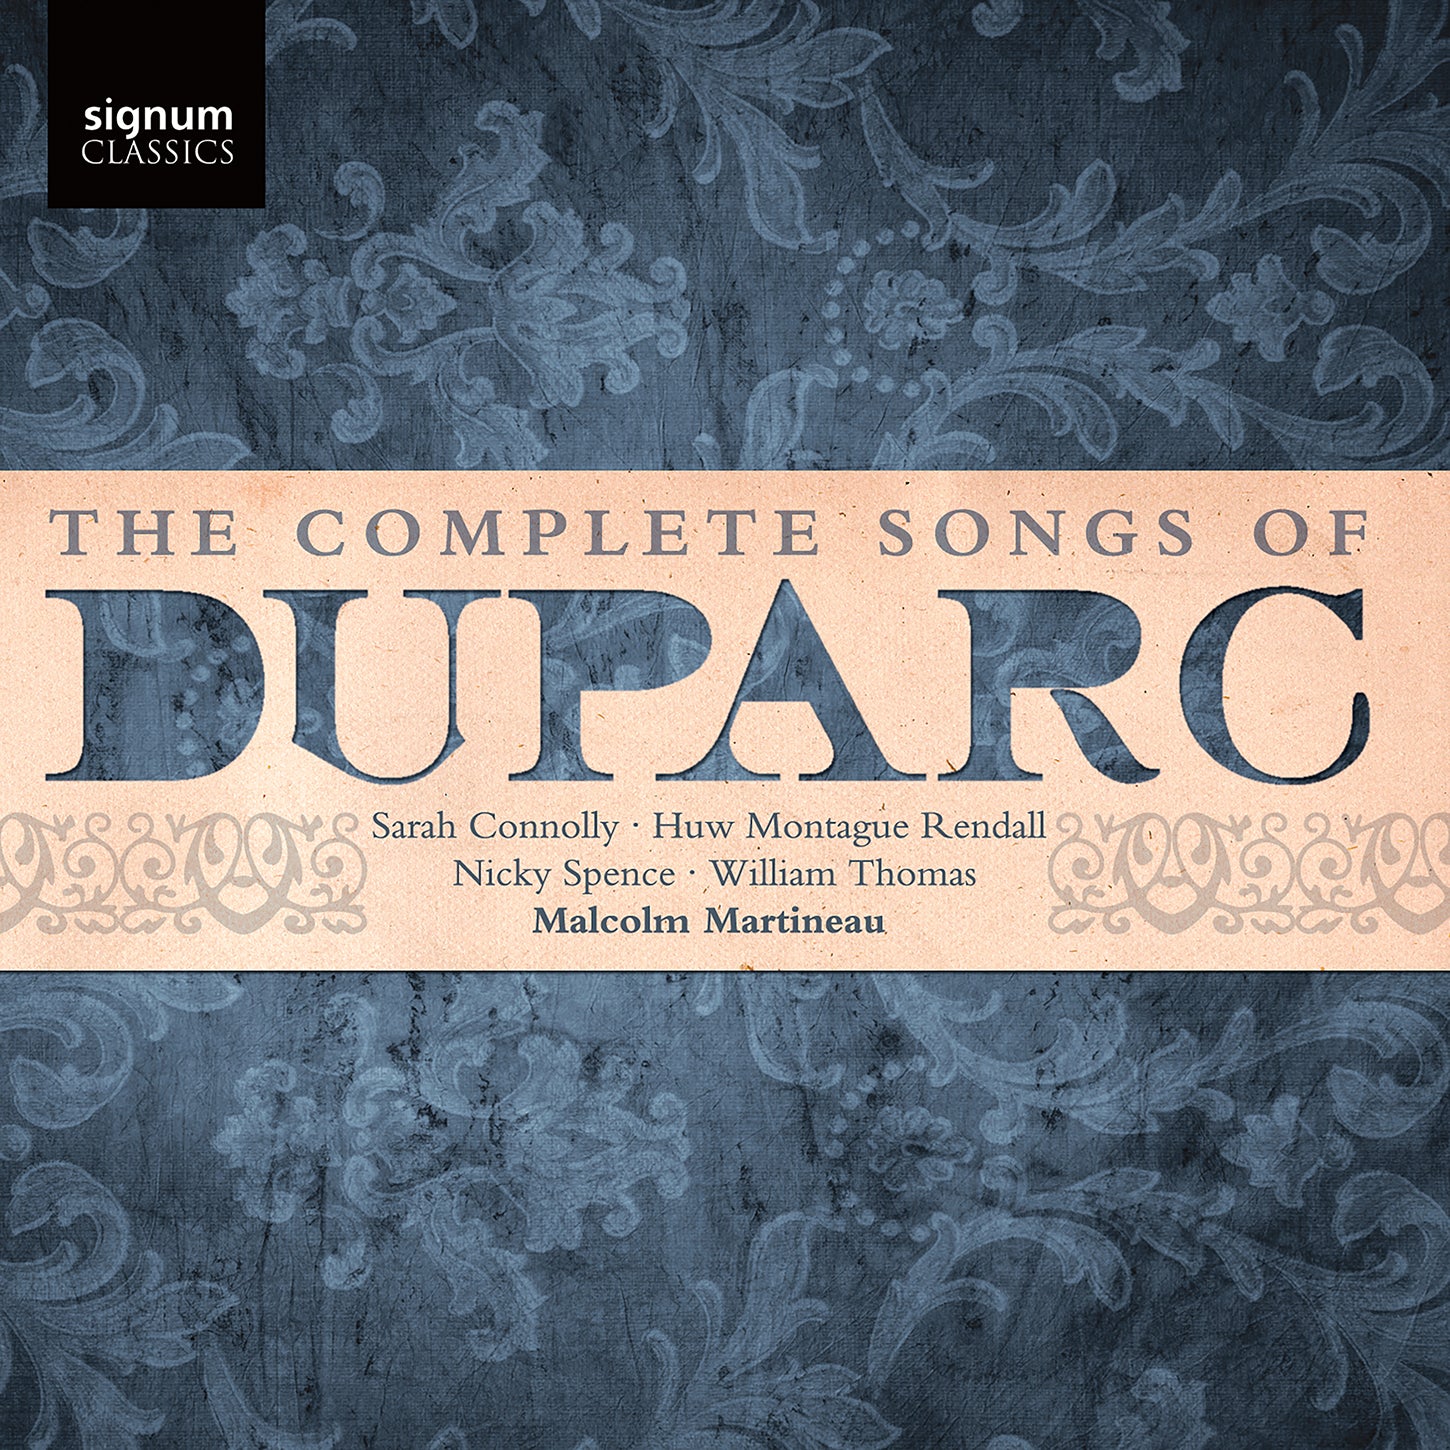 The Complete Songs of Duparc / Connolly, Spence, Thomas, Rendall, Martineau